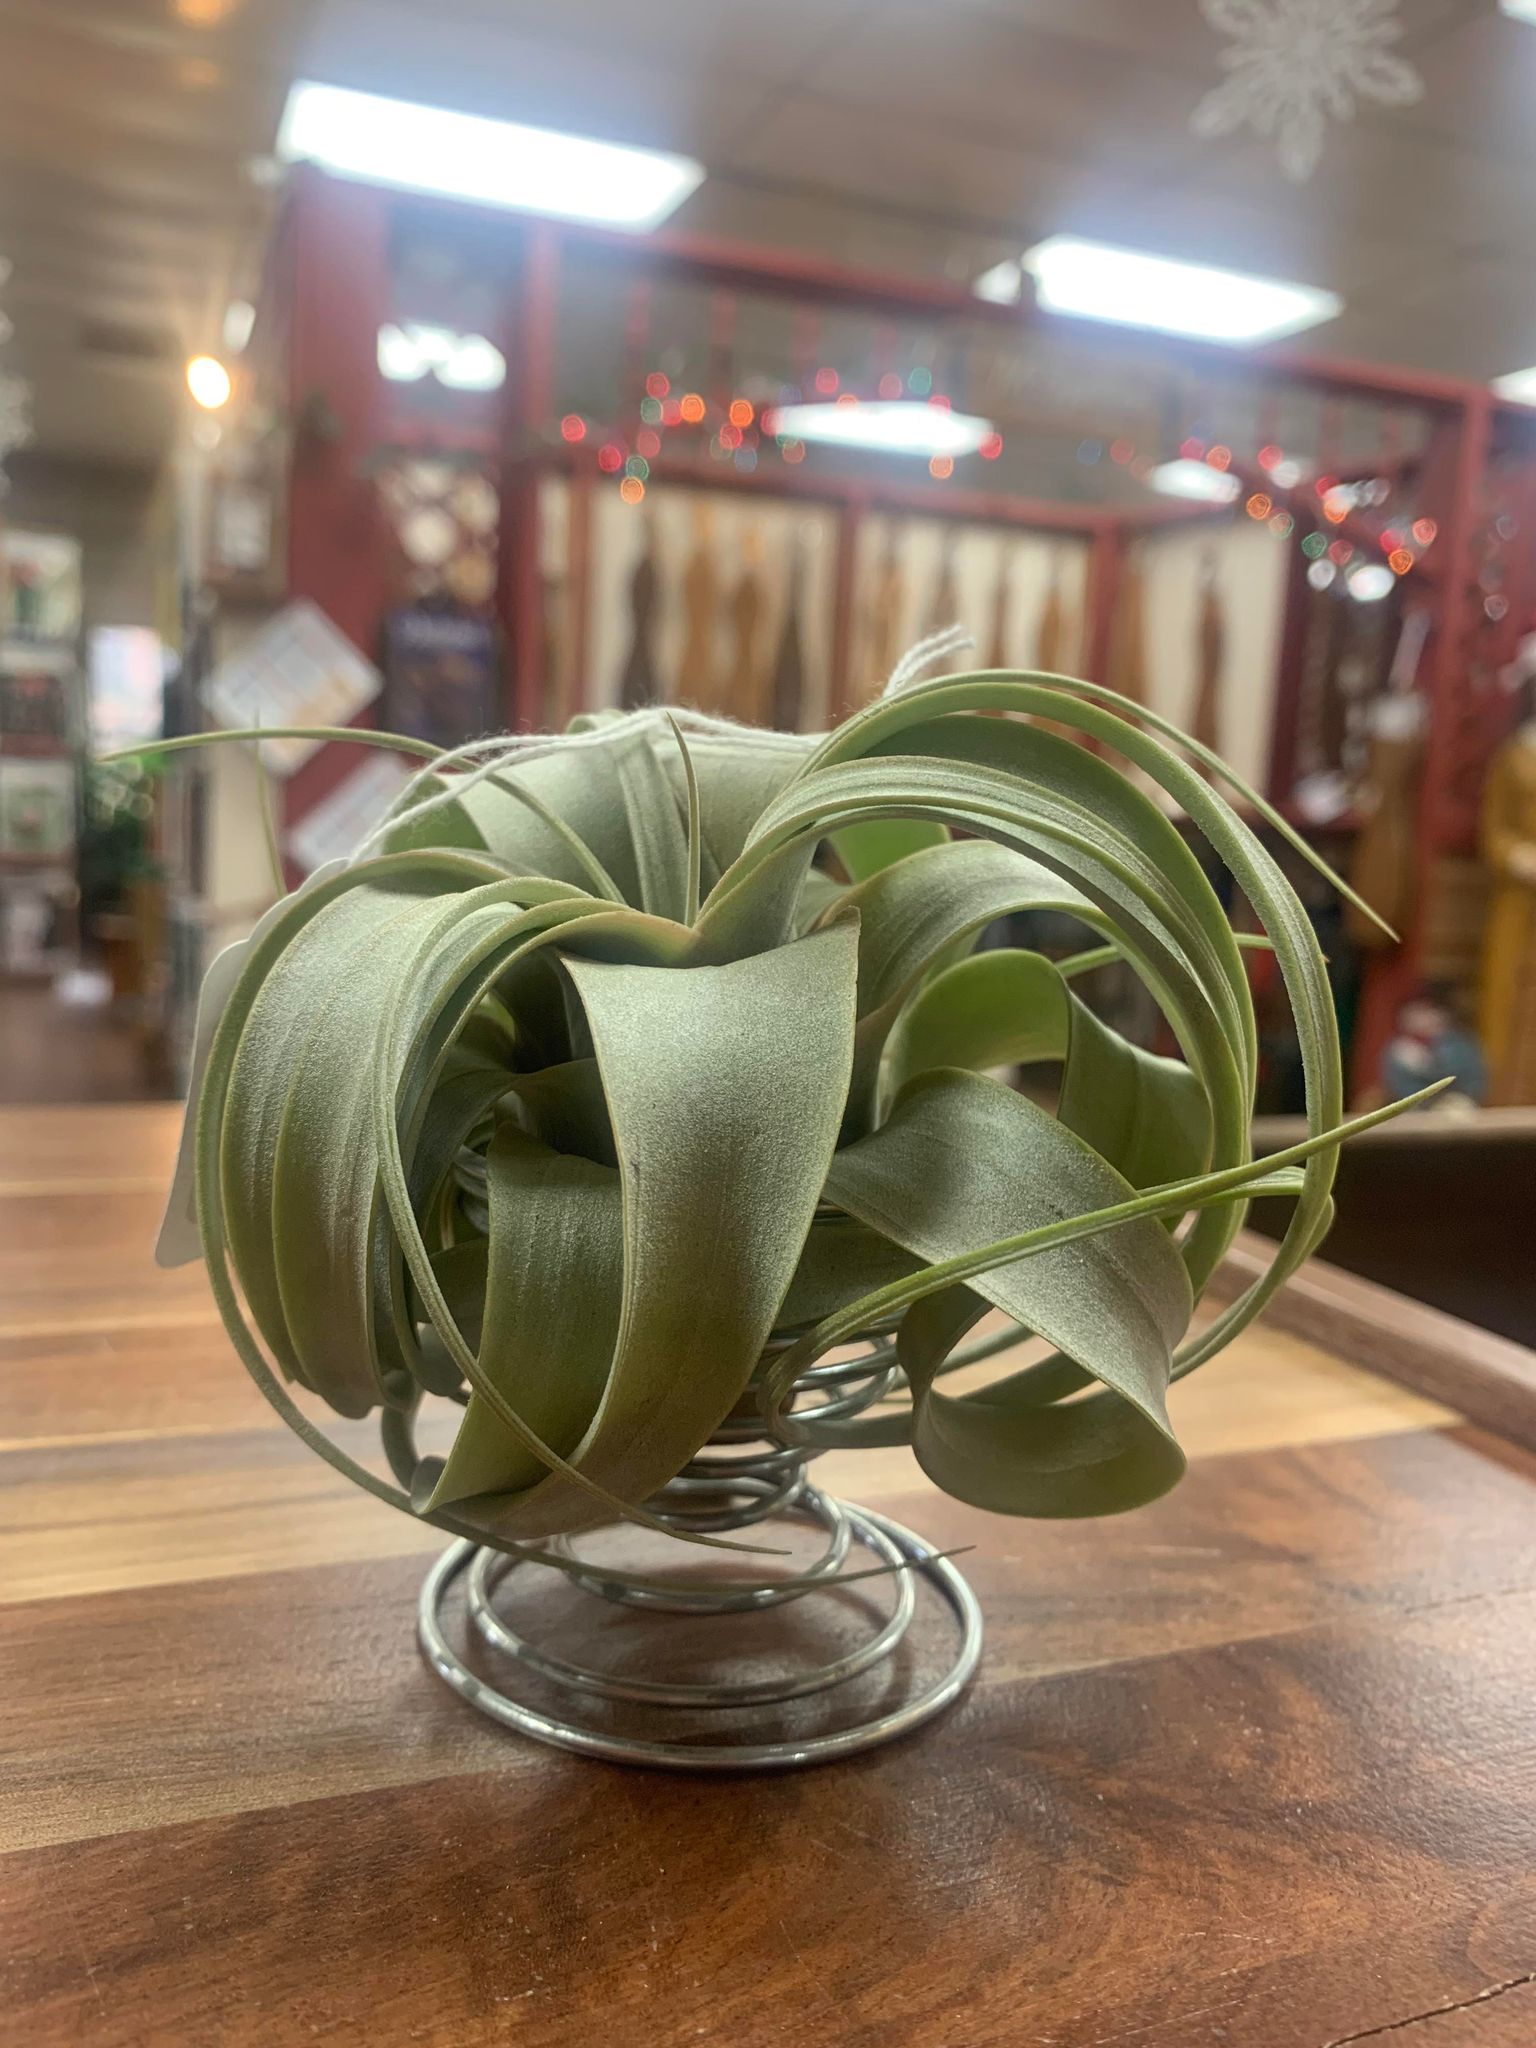 In a store, an air plant gracefully rests on a table, with the assistance of an Air Plant Wire Coil Stand.